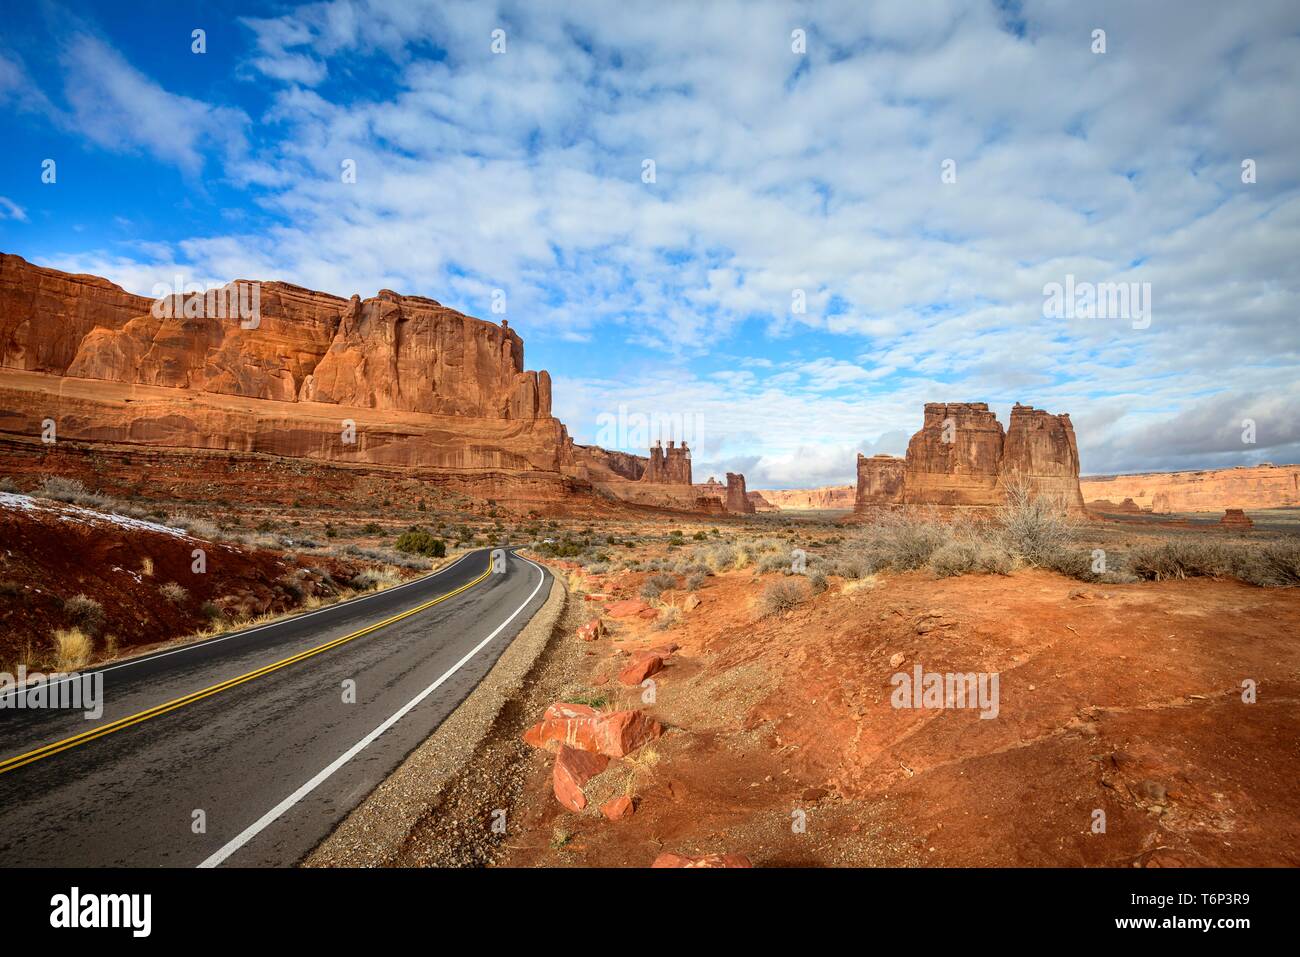 Arches Scenic Drive, Arches National Park, Utah, USA Banque D'Images